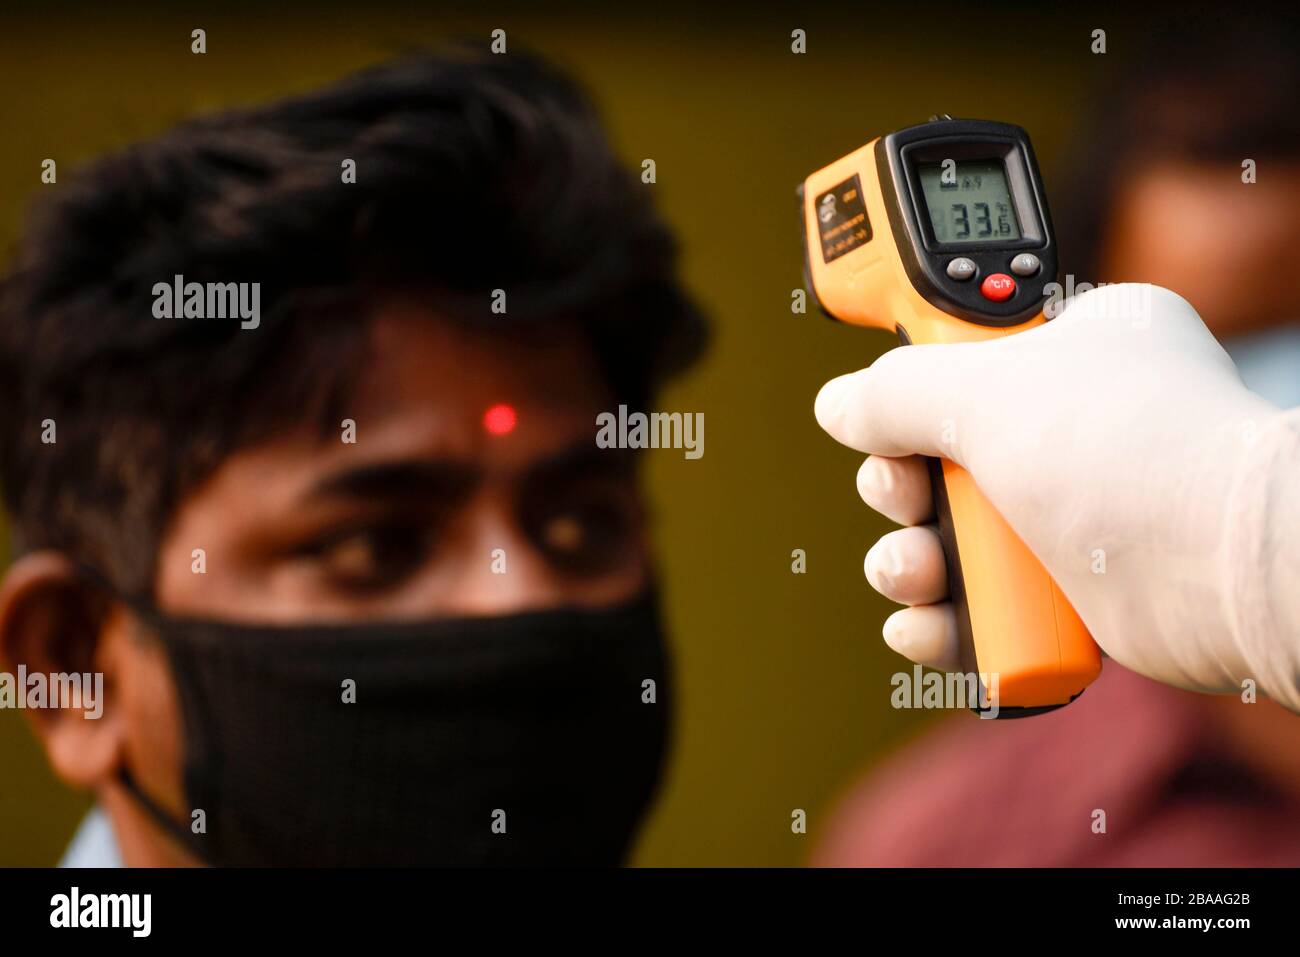 Guwahati, Assam, India. 26th Mar, 2020. Corona Virus emergency in Assam. Guwahati, Assam, India. 26 March 2020. Police personnel thermal screening before entering to the Governor House of Assam, in Guwahati on 26 March, 2020. PHOTO: DAVID TALUKDAR Alamy Live News Credit: David Talukdar/Alamy Live News Stock Photo